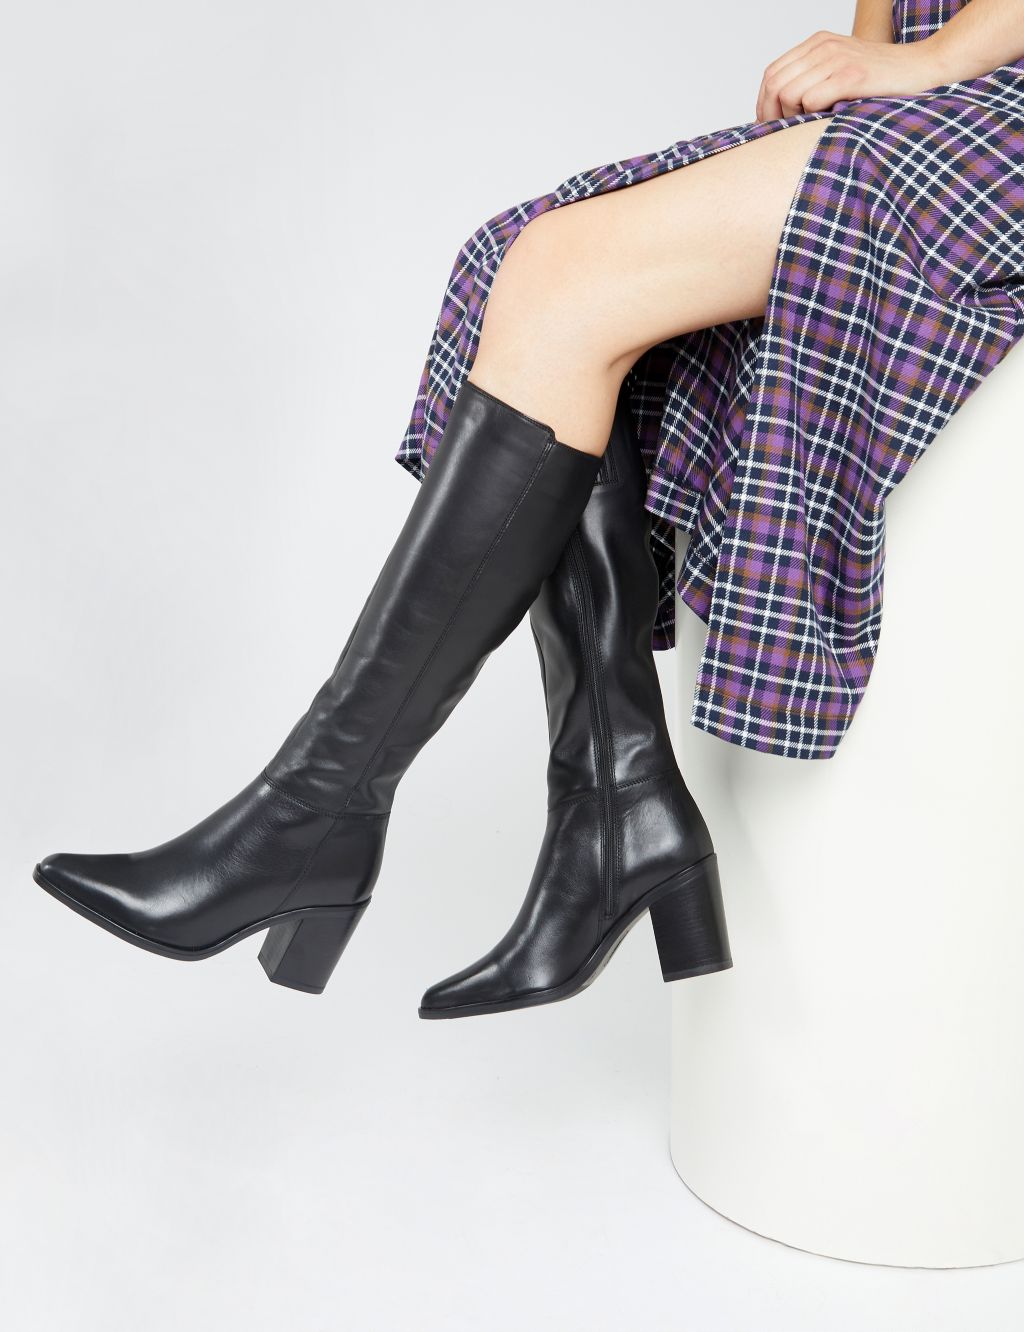 Slim Calf Leather Block Heel Pointed Knee High Boots image 1